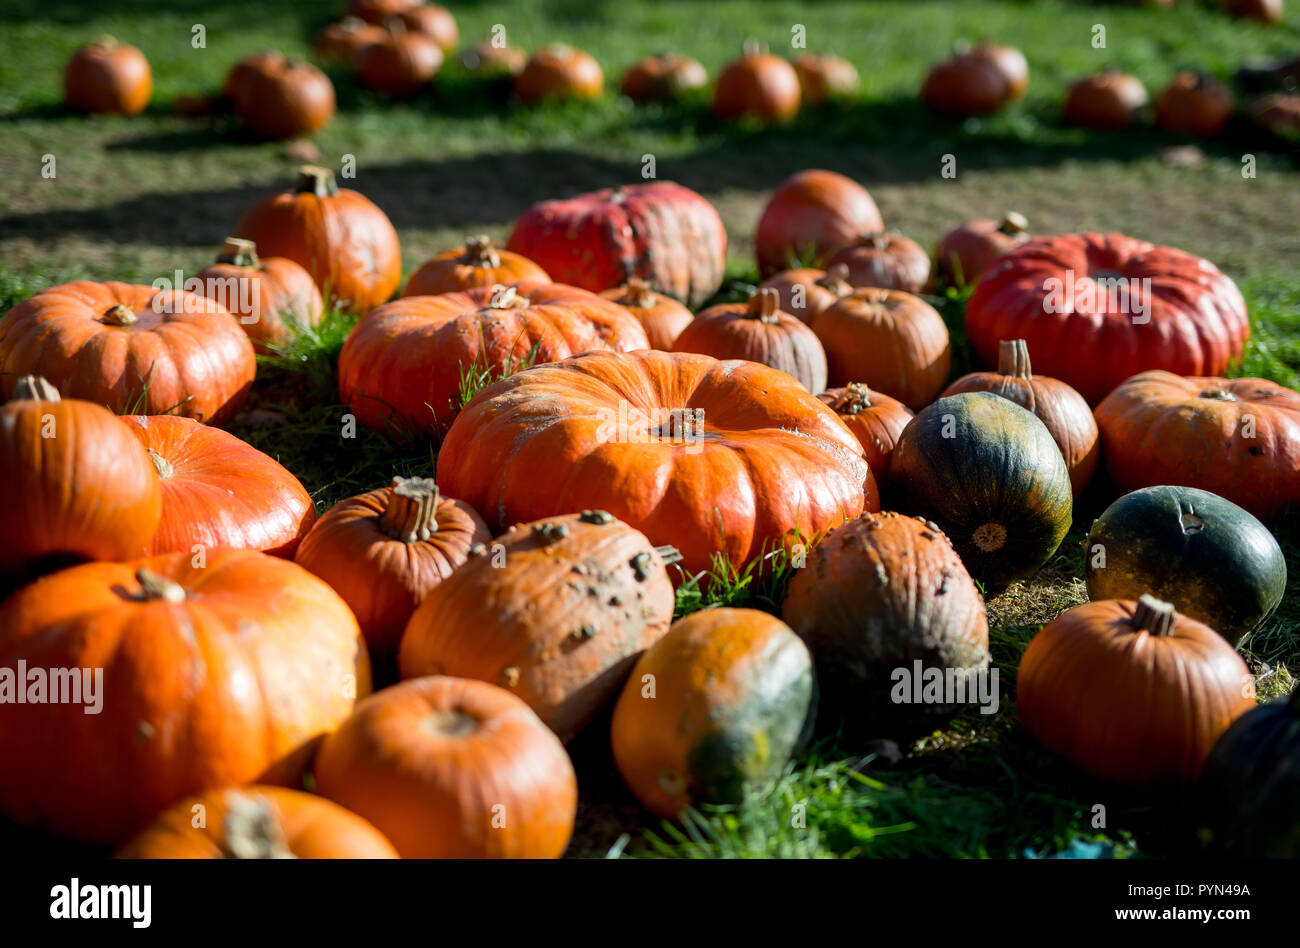 Pumpkins at a farm in Sussex, UK used for creating Jack o lanterns for the celebration of Halloween and are also edible. Stock Photo